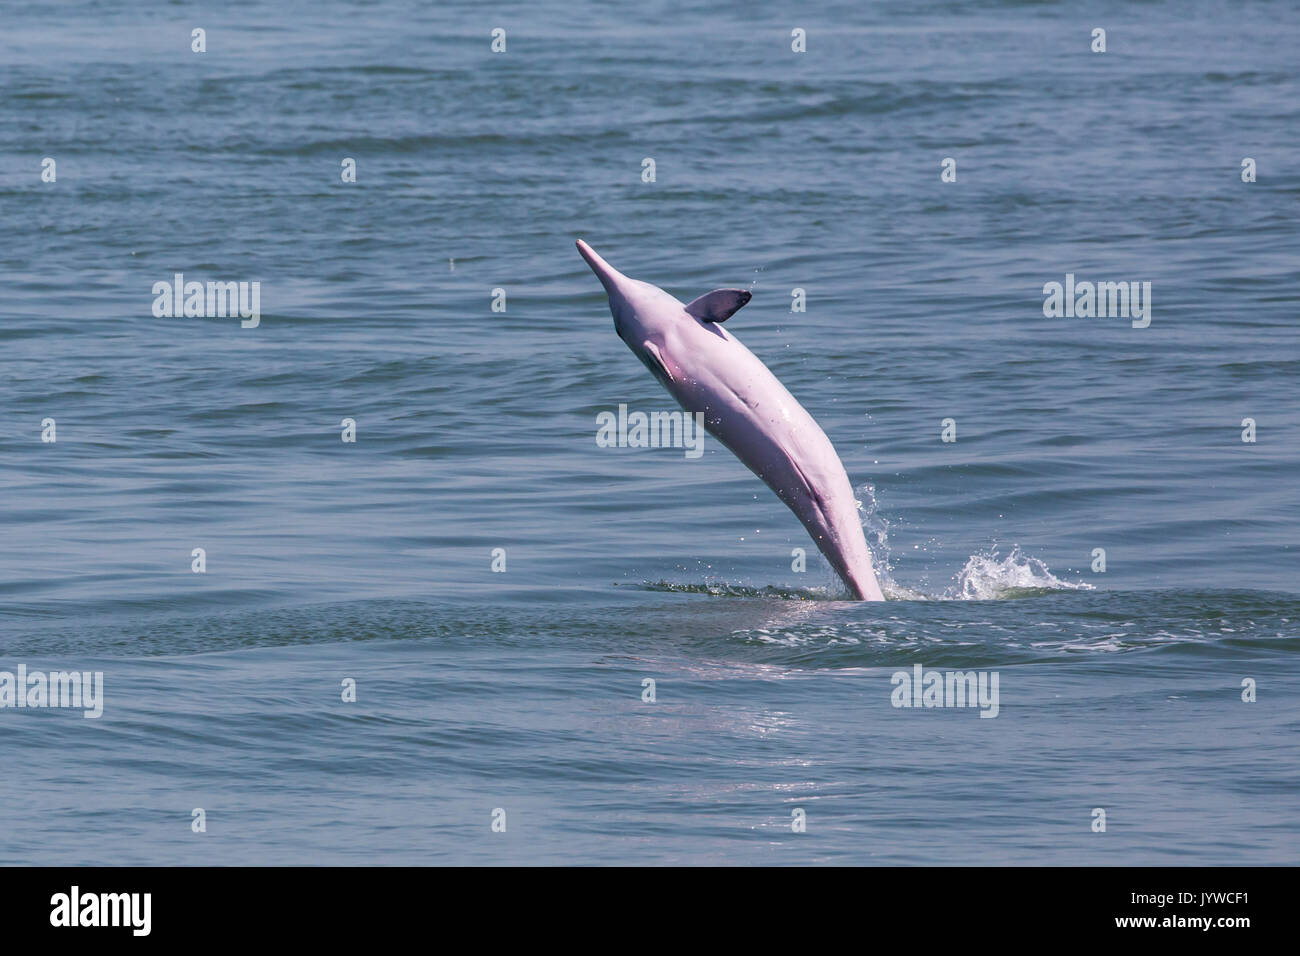 Indo-Pacific Humpback Dolphin (Sousa chinensis) breaching in Hong Kong waters. This coastal species is subject to increasing threats from humans. Stock Photo